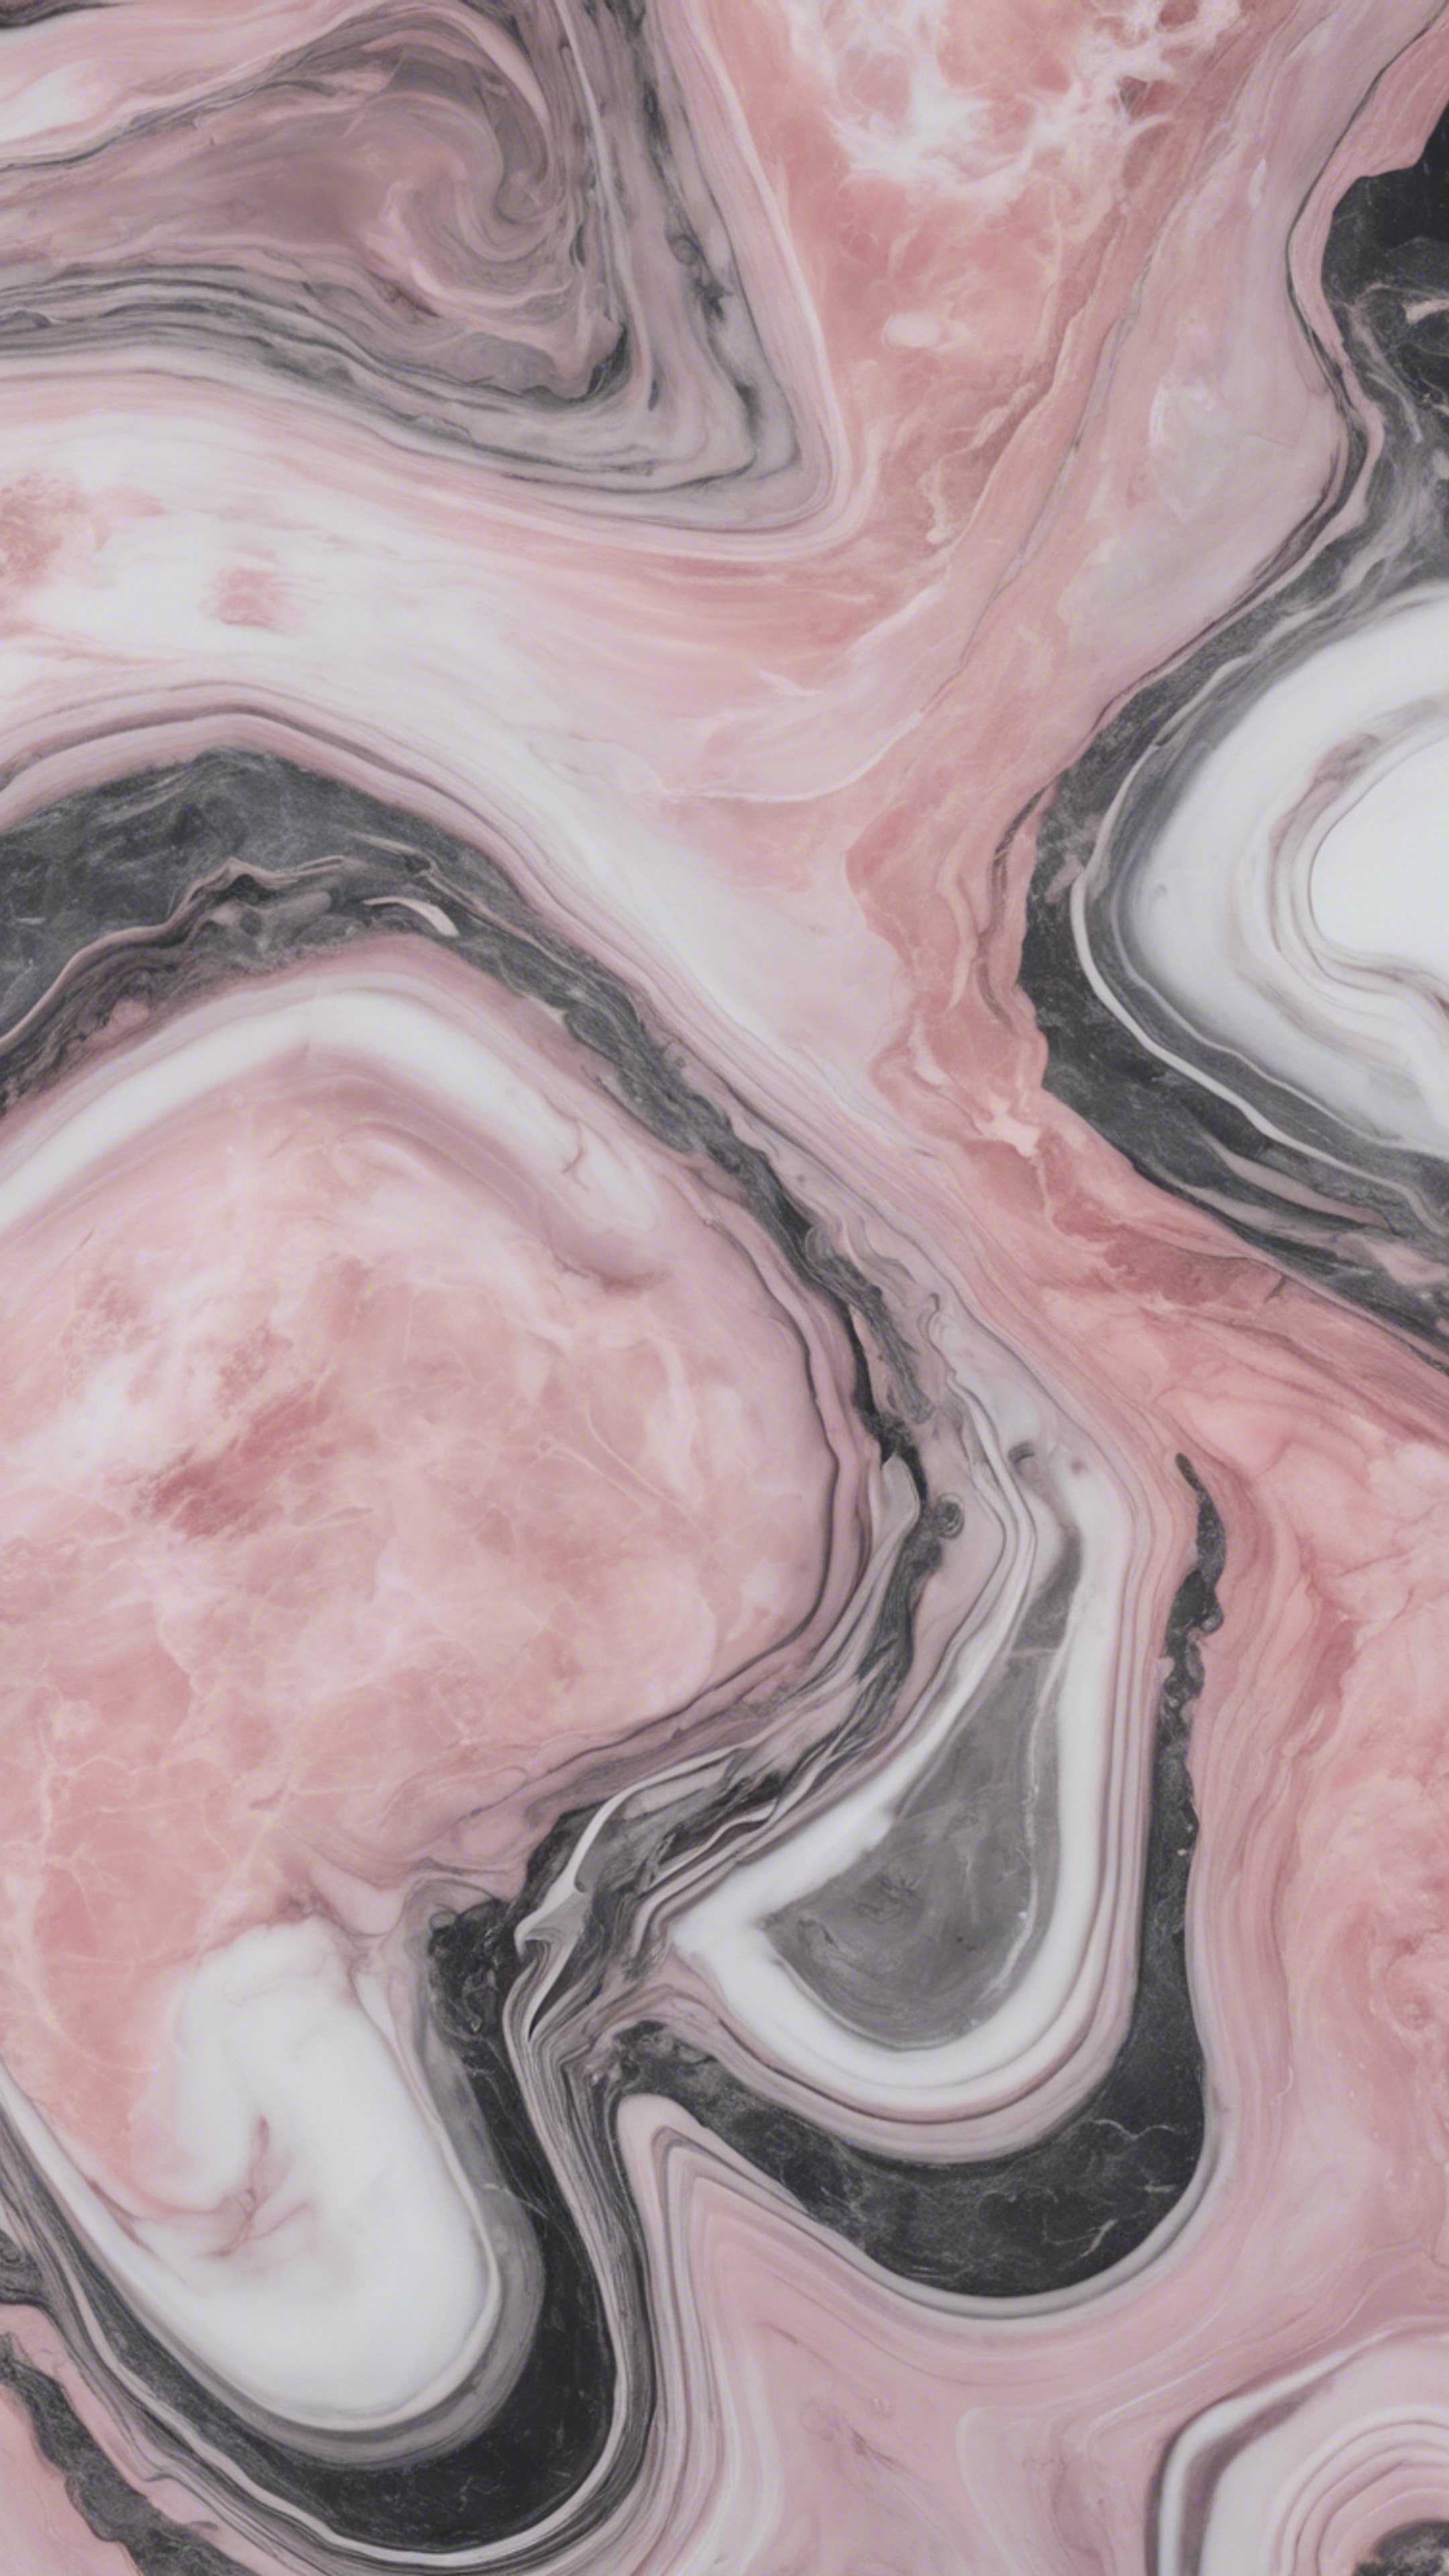 A swirling pattern of pink, white, and charcoal grey characteristic of polished pink marble. Wallpaper[fb90daec103040ffbaff]